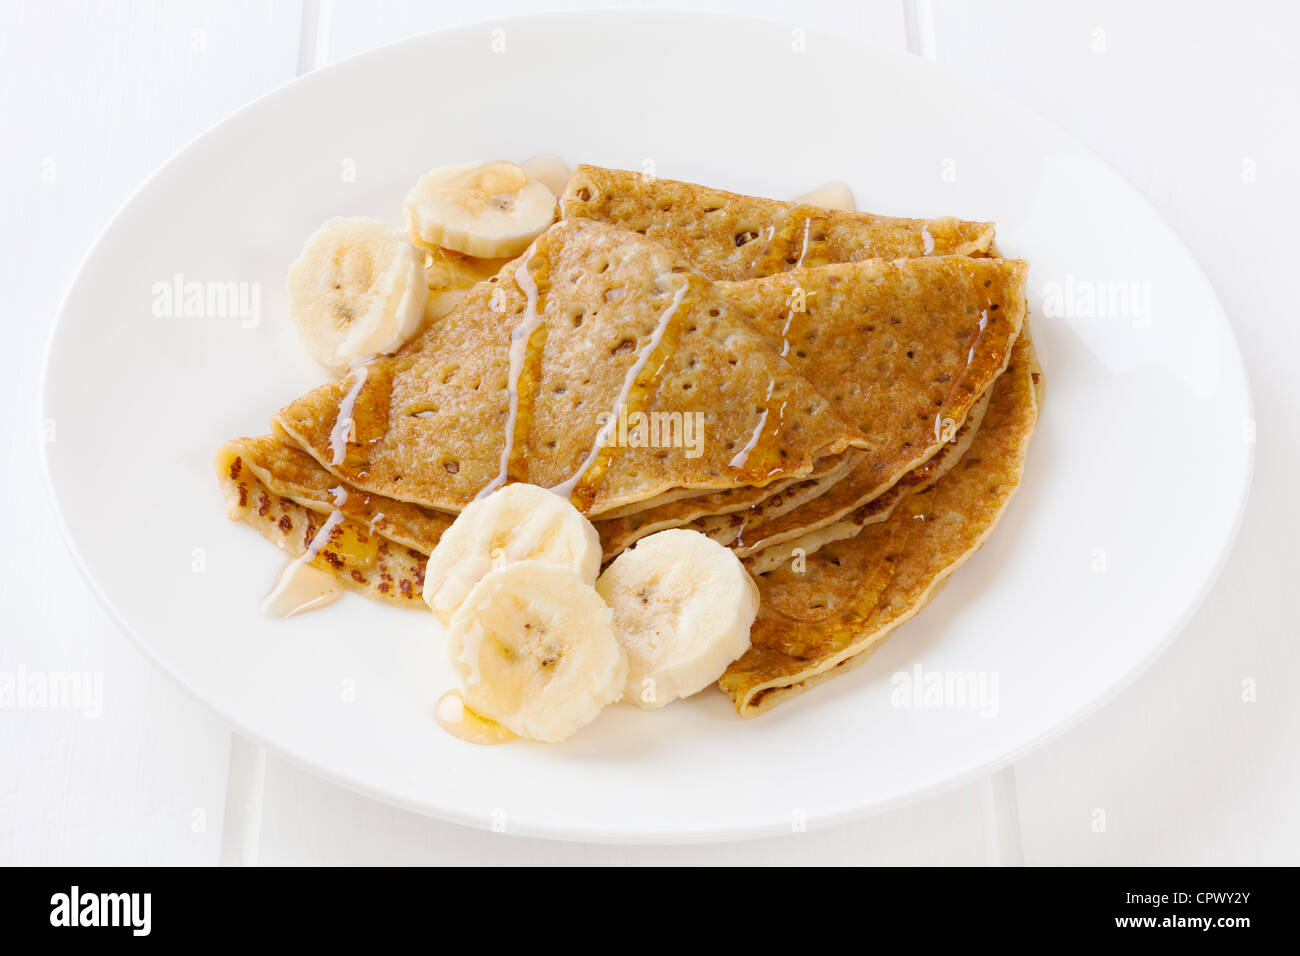 A plate of crepes or pancakes, with sliced banana and maple syrup. Stock Photo